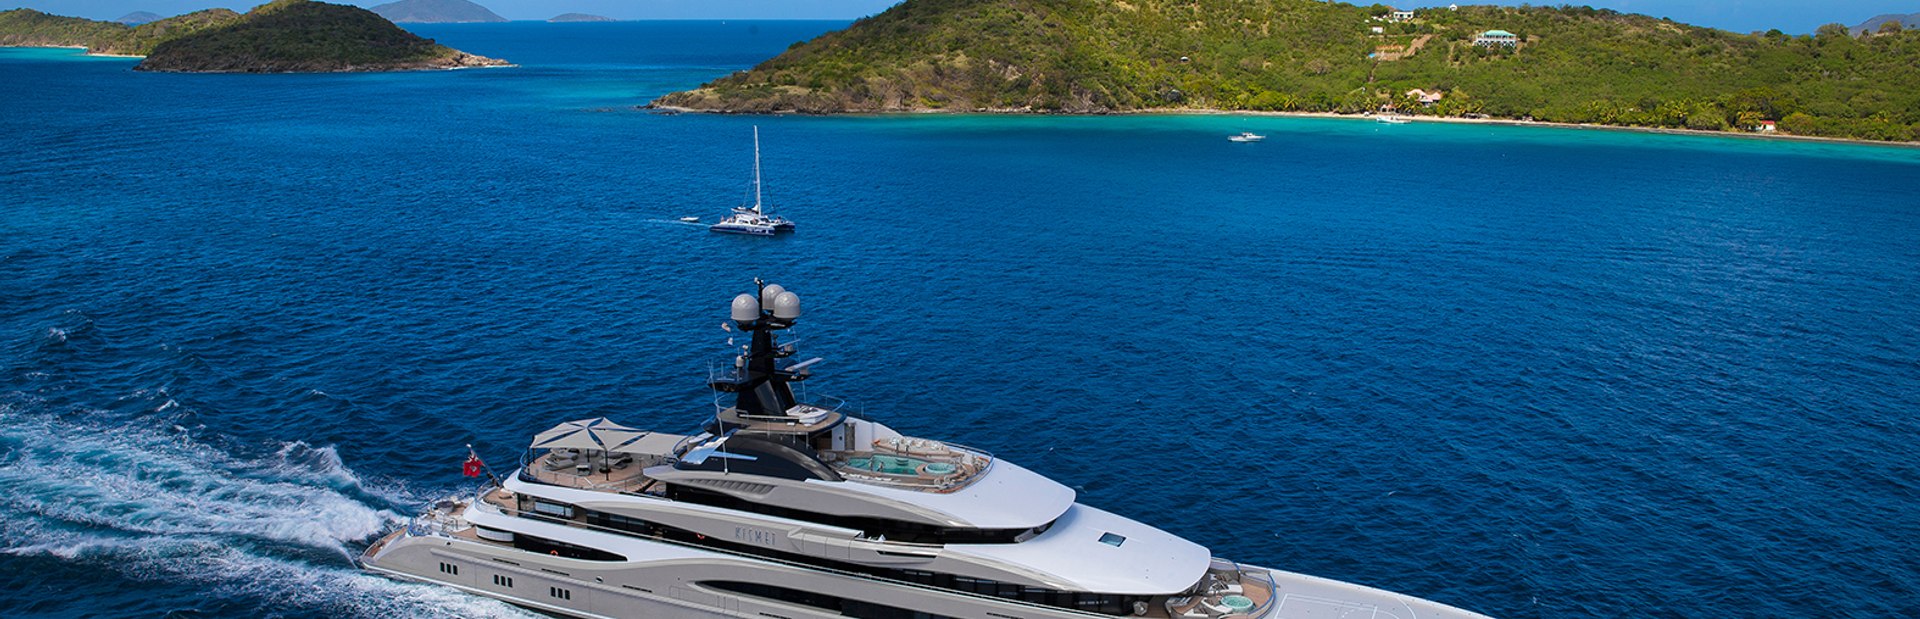 Why the Virgin Islands are perfect for private yacht charters